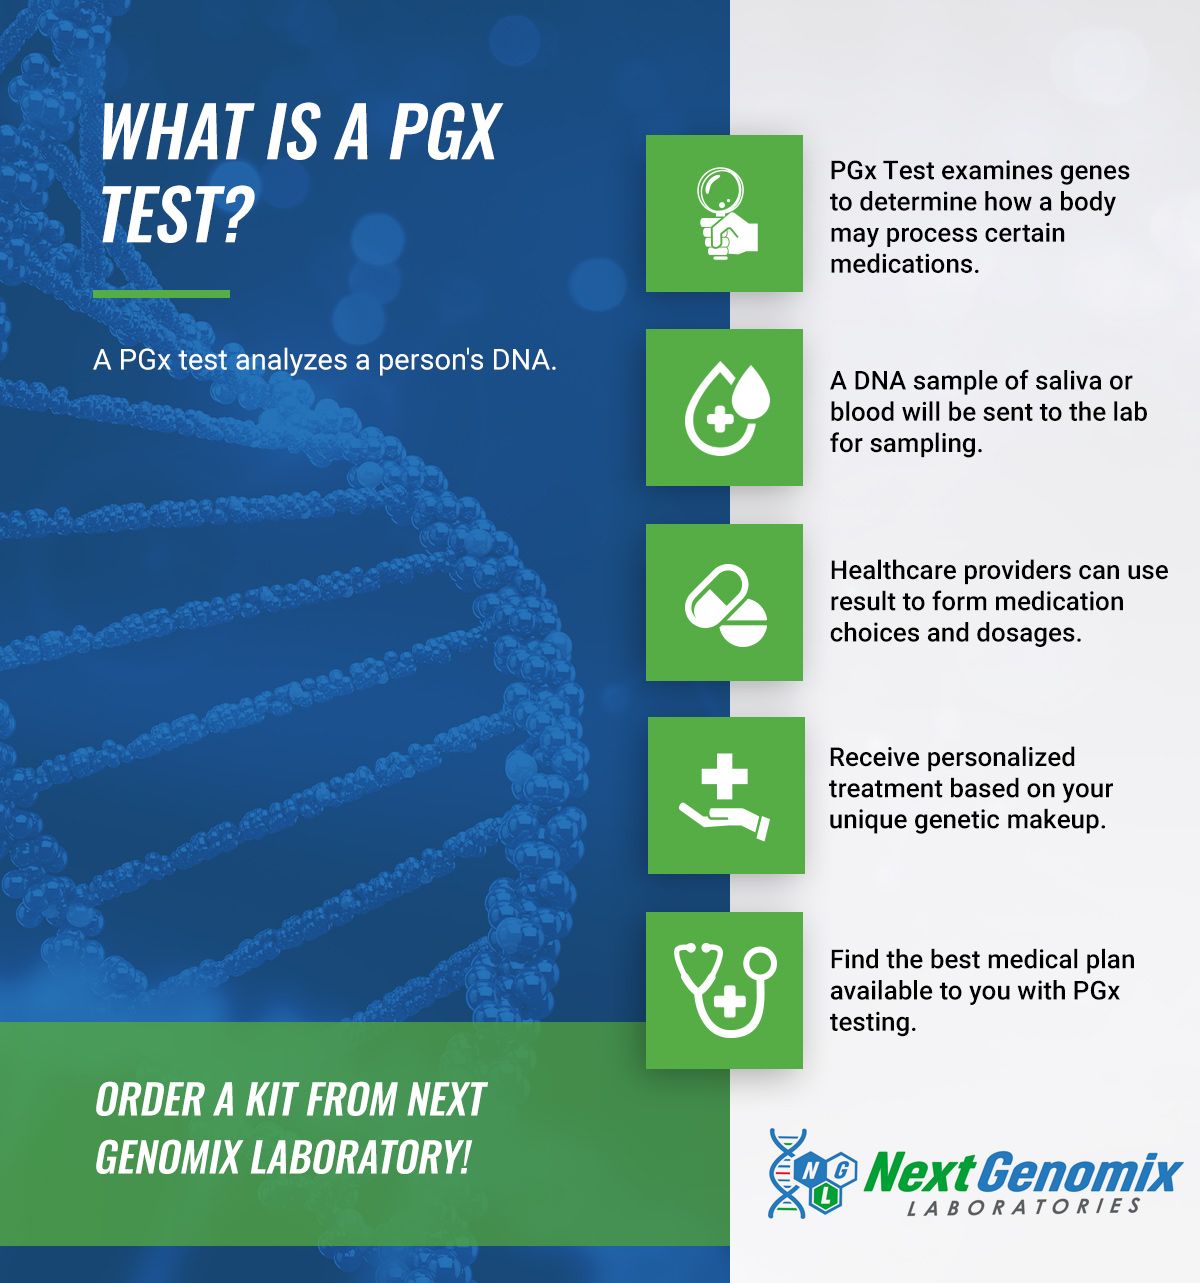 What Is A PGx Test?